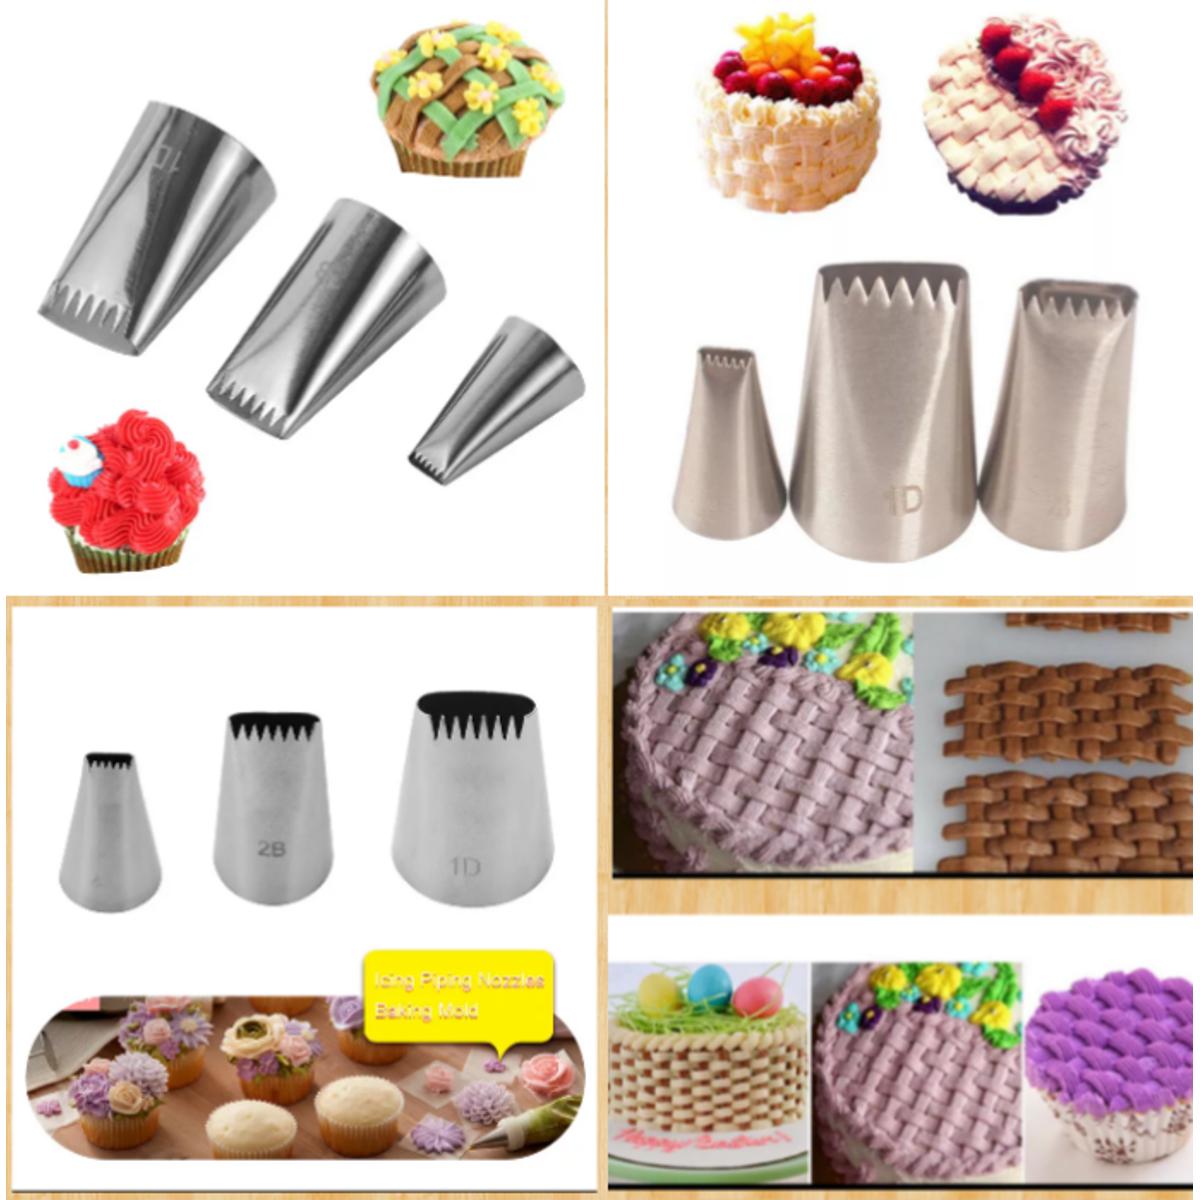 3Pcs/set Stainless Steel Cake Icing Piping Nozzle Basket Weave Pastry Tips  Cake Cream Cupcake for Sugar Craft Decorating Tools - AliExpress